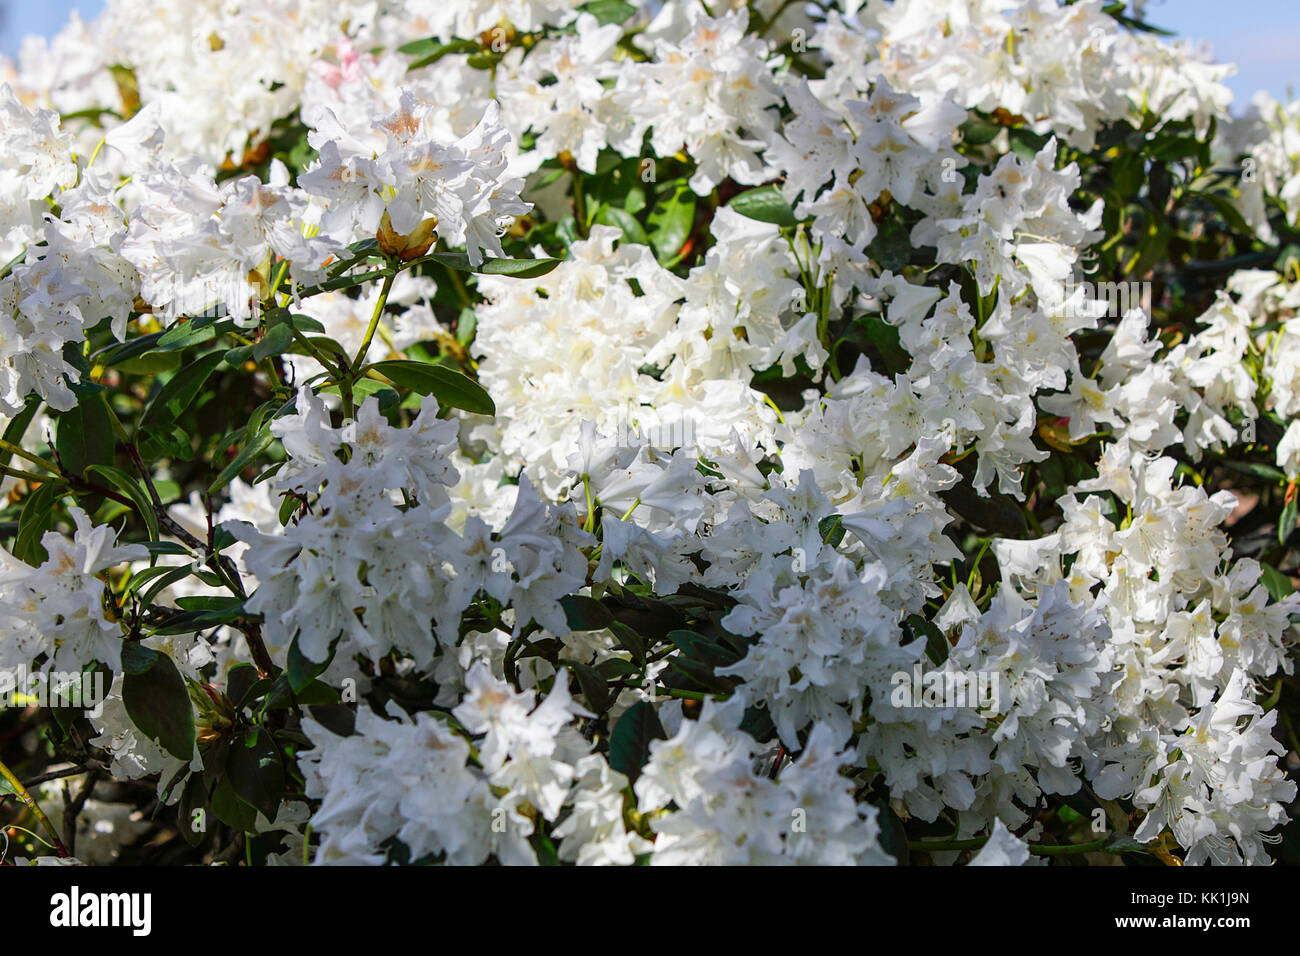 Rhododendrons in full bloom captured by photographer Peter Wheeler in his rear garden in Shropshire. Stock Photo